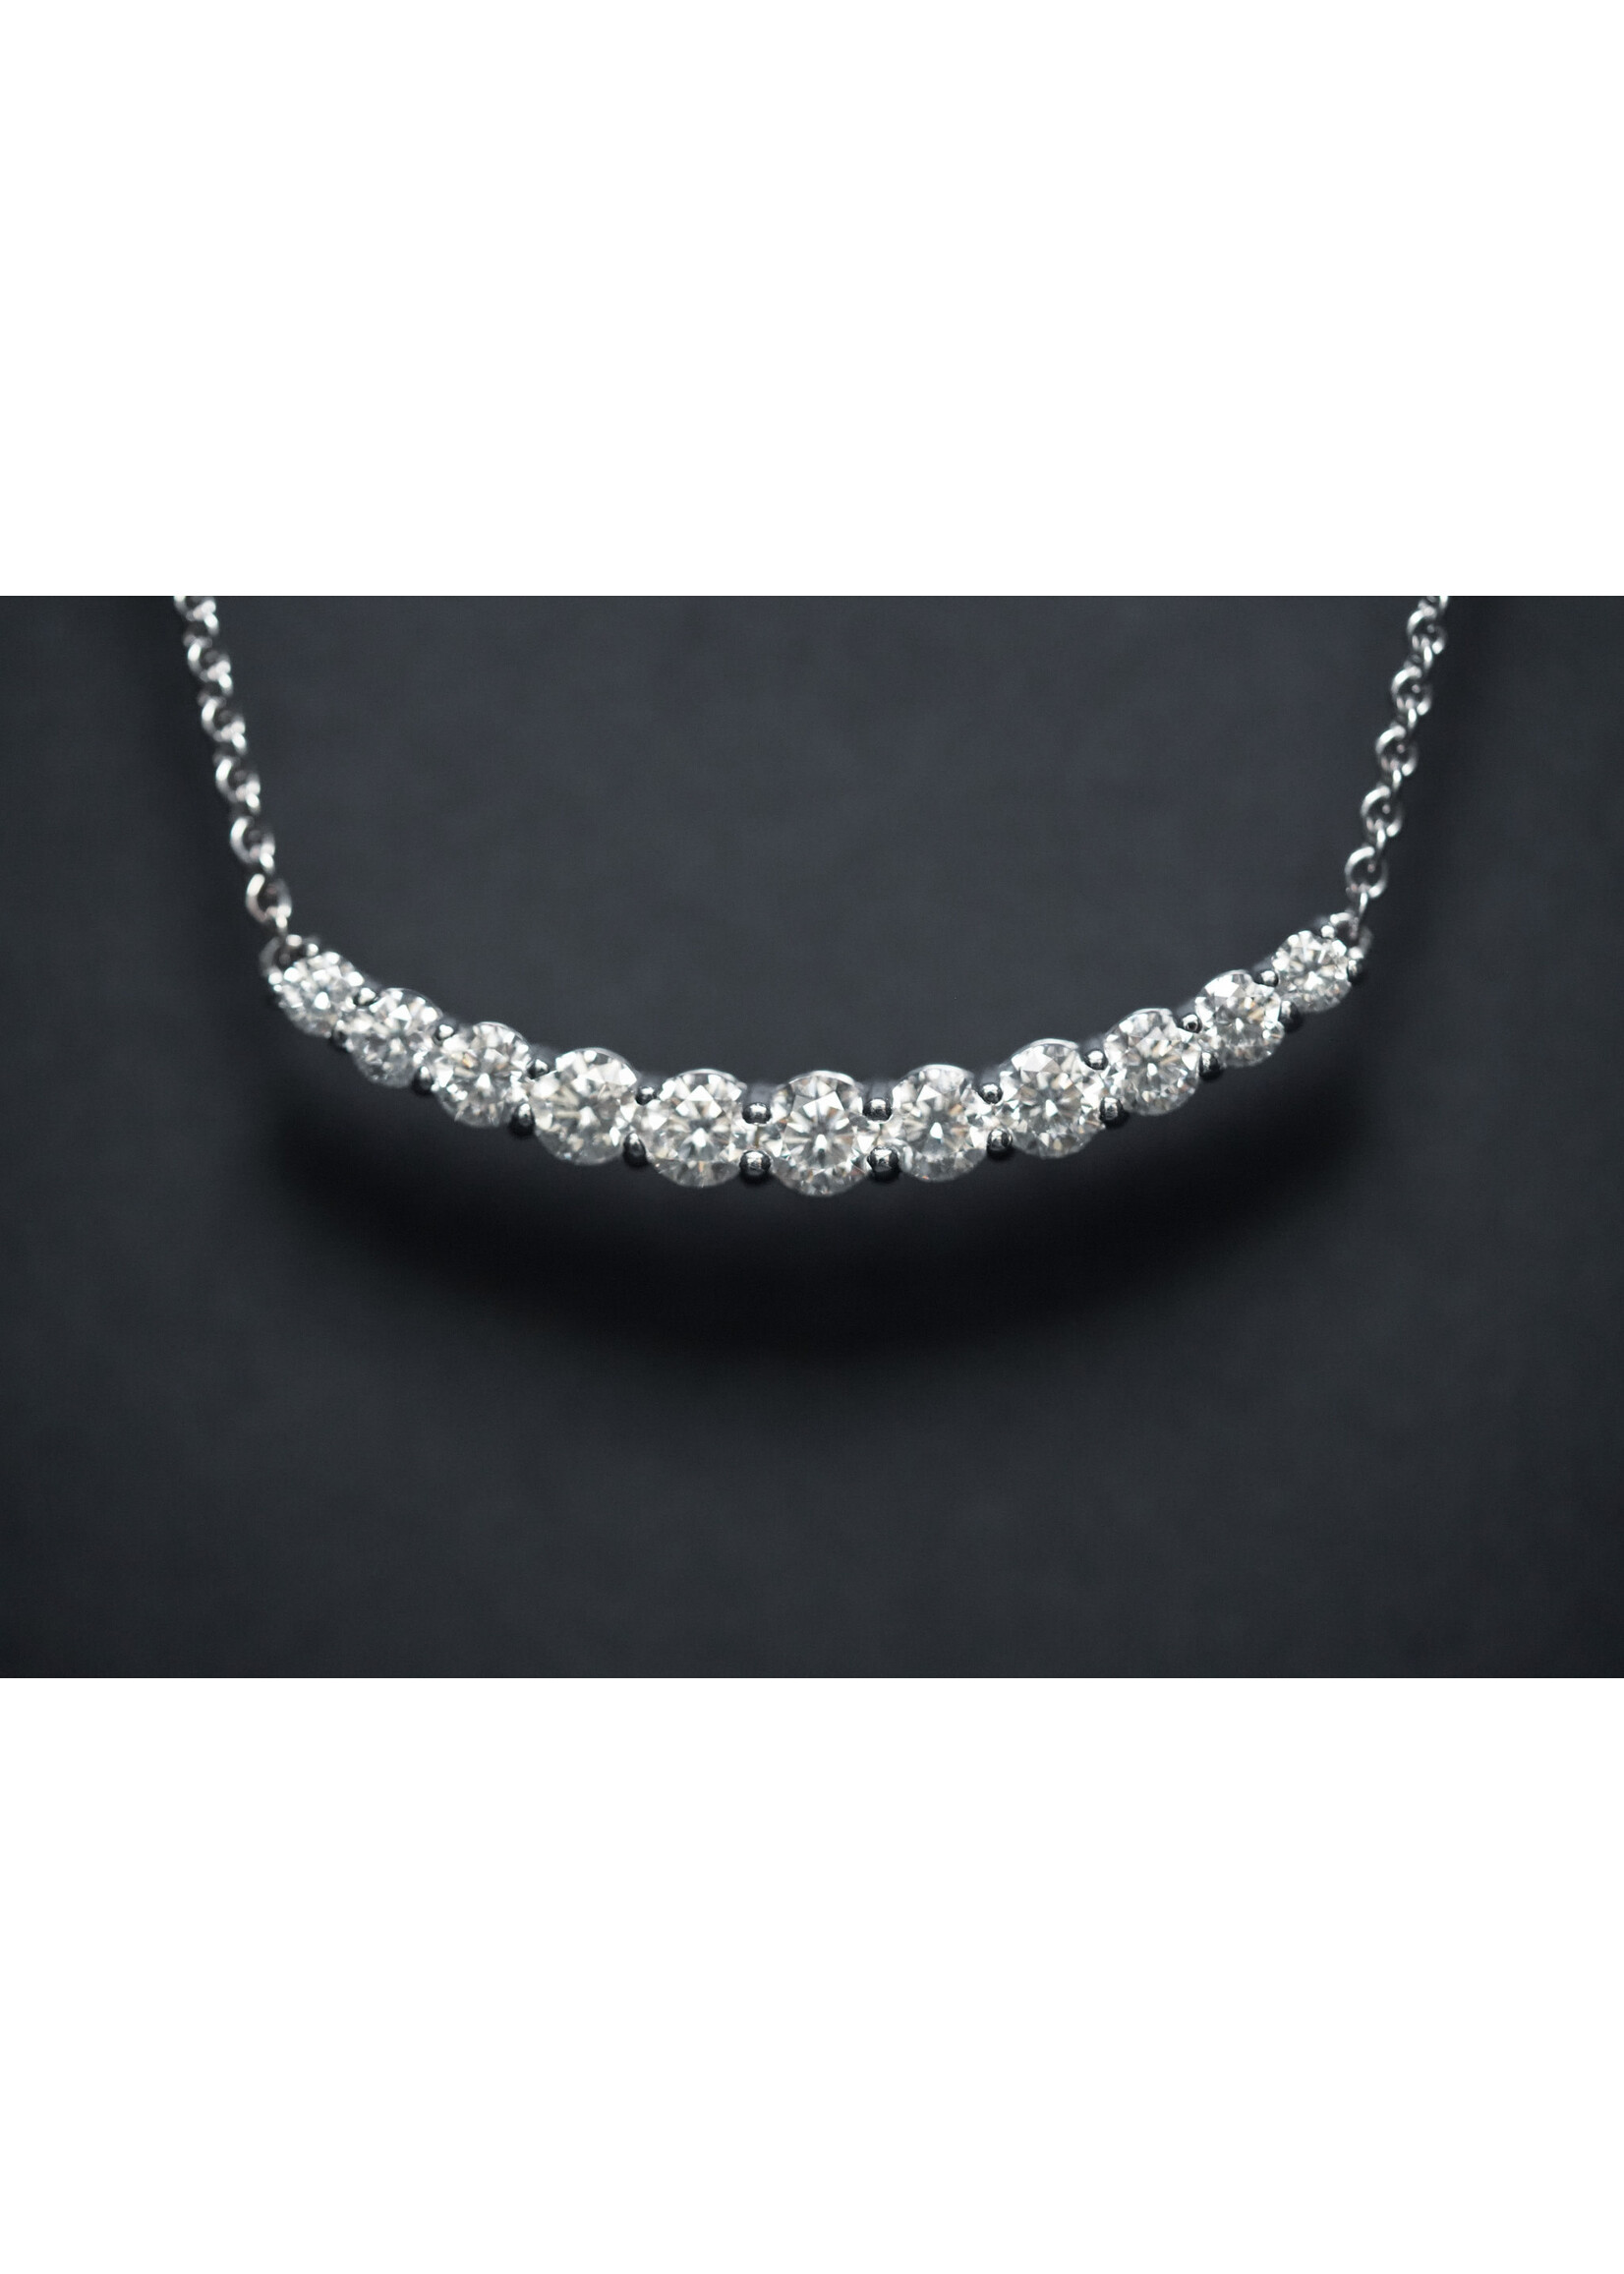 14KW 6.8g 2.00ctw Curved Diamond Bar Necklace 18"